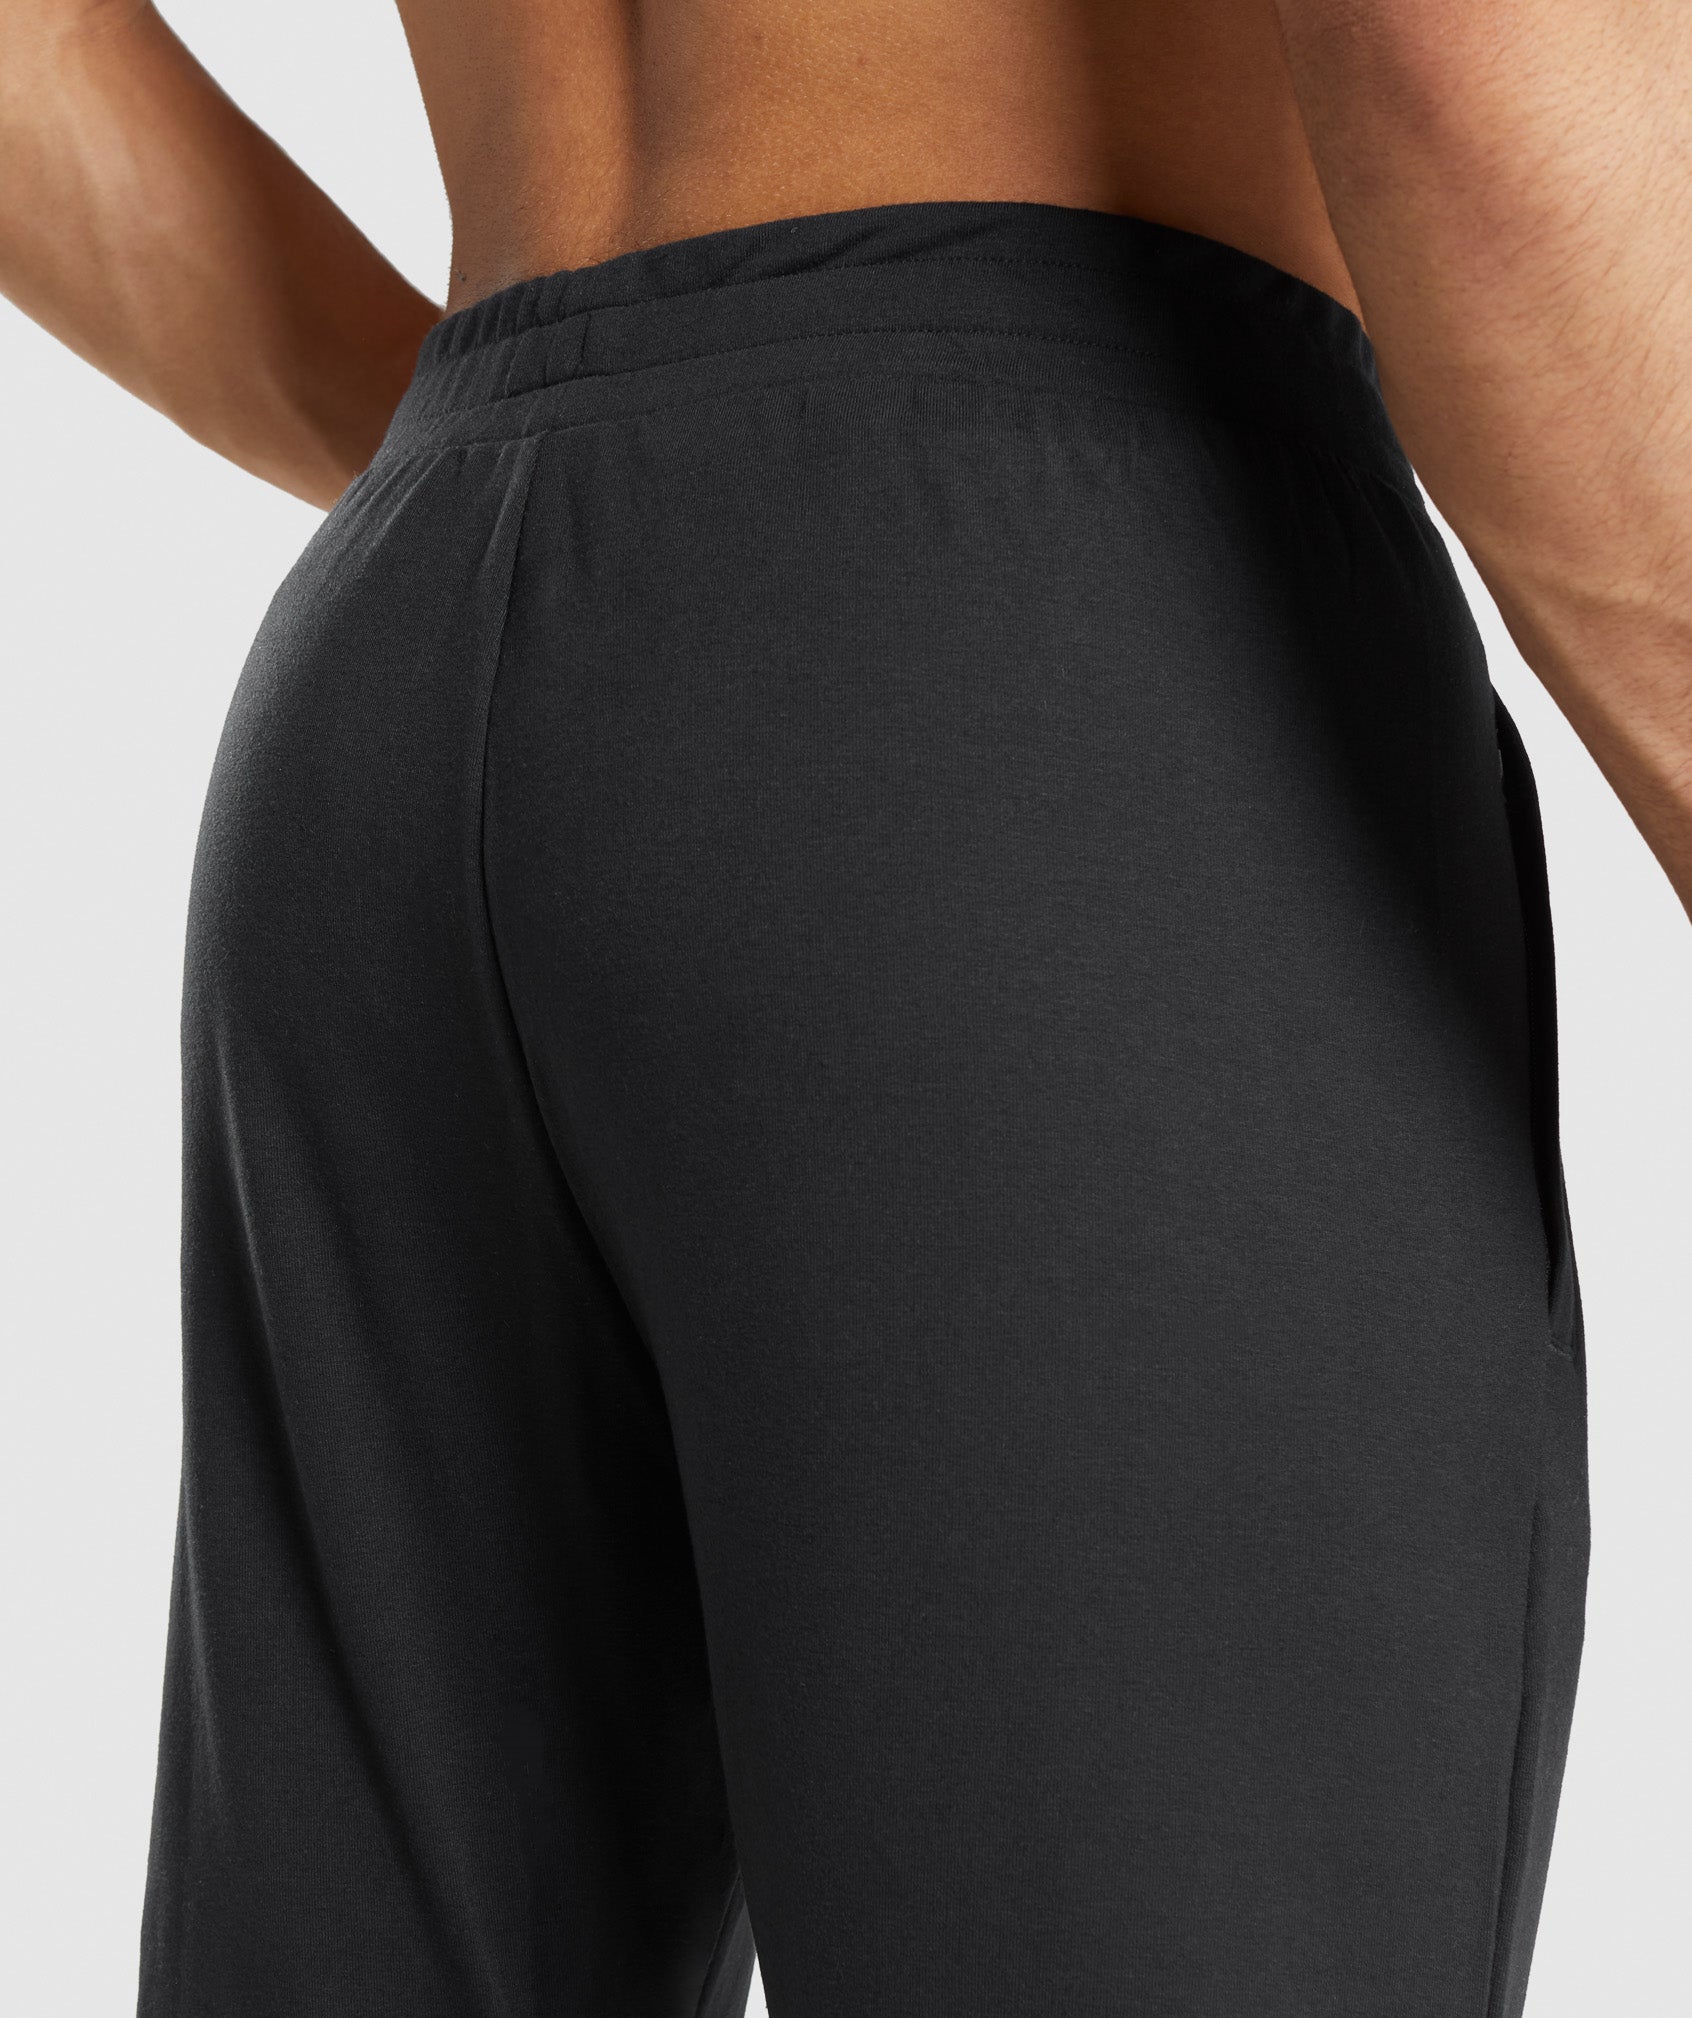 Gymshark Sizing and Comparisons  Luxe Legacy Bottoms and Fit Tapered  Bottoms V 2.0 